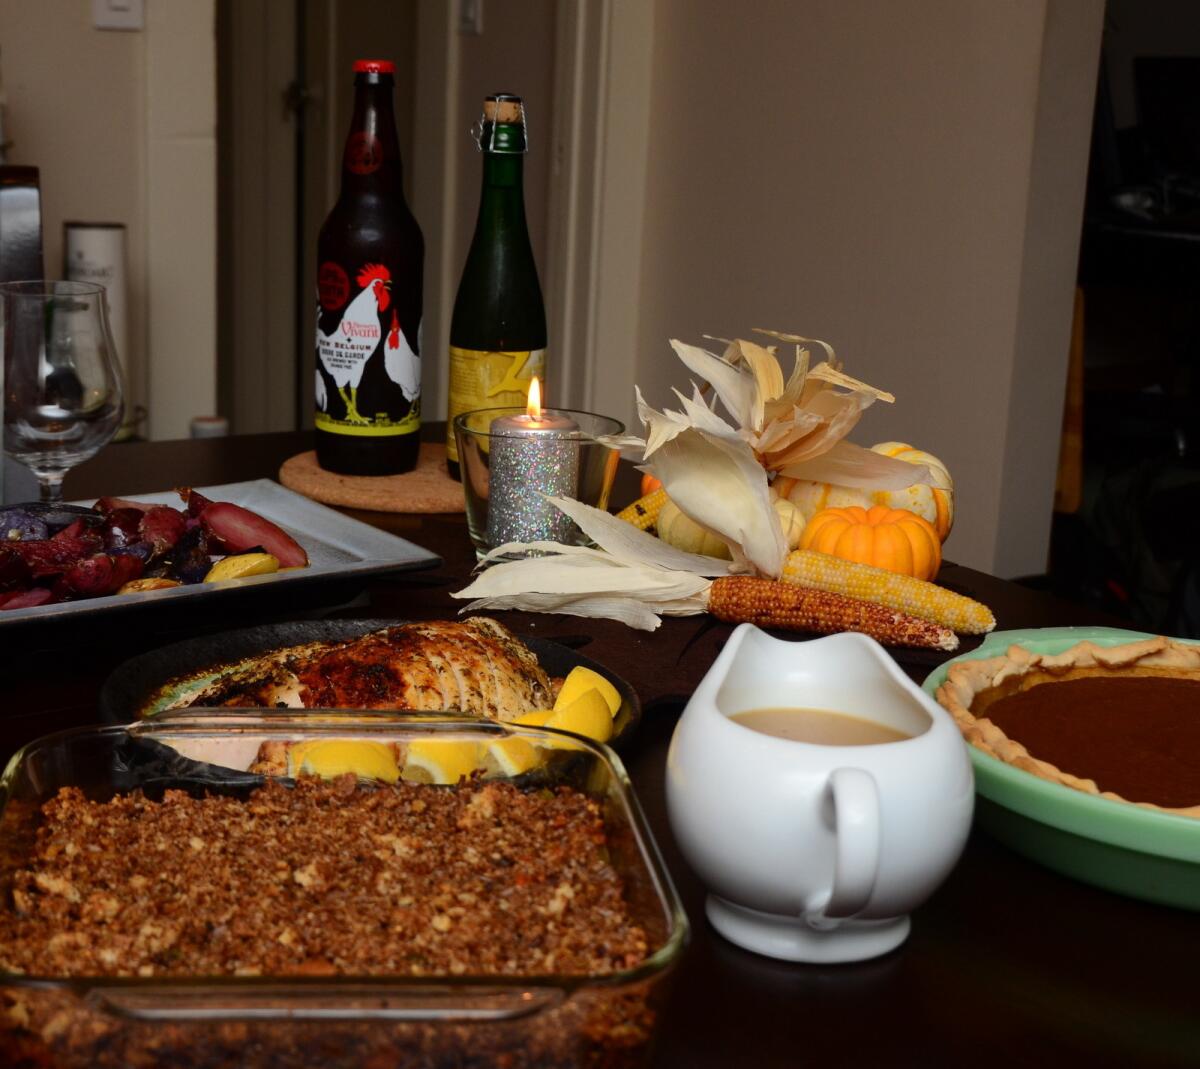 Craft beers can match up well with Thanksgiving dinner.